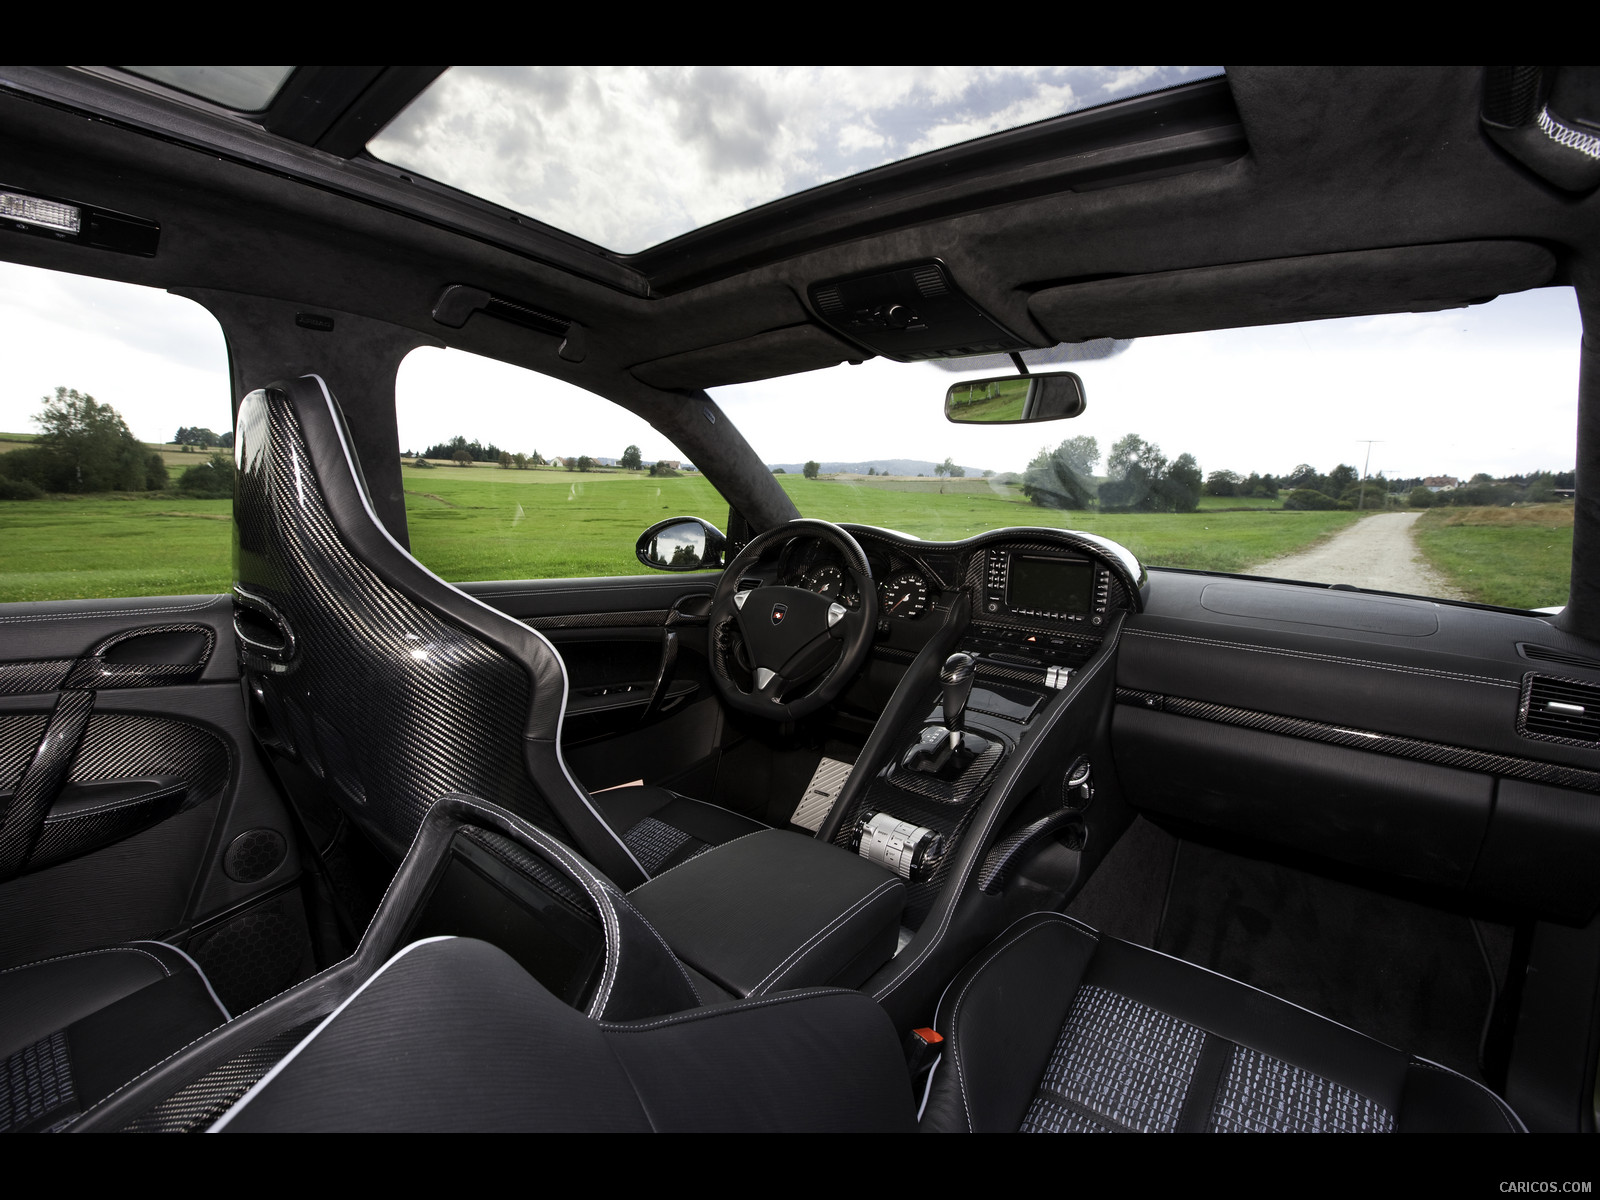 2009 Mansory Chopster based on Porsche Cayenne Turbo S  - Interior, #29 of 38